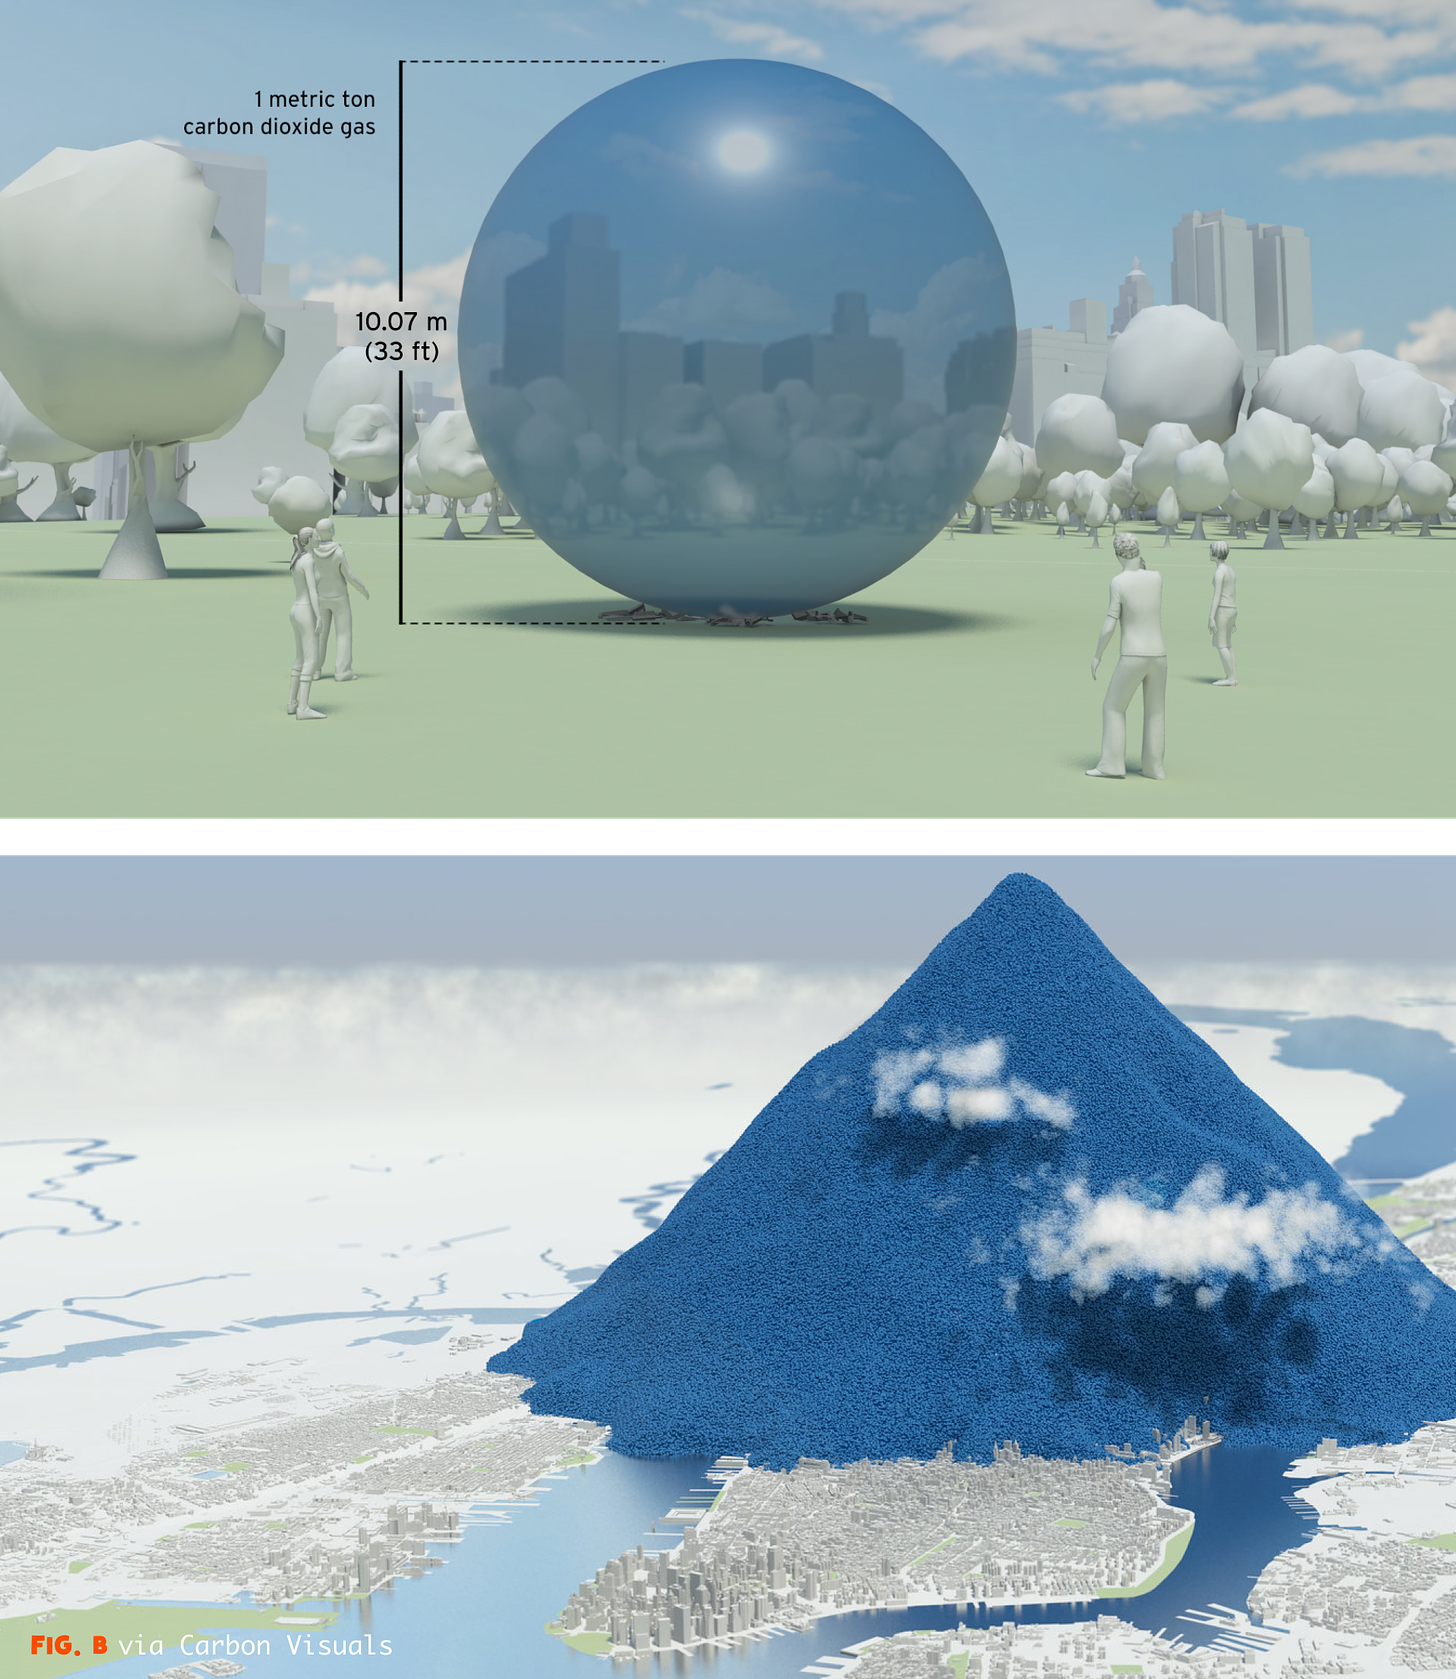 Two digital renderings: The top is a blue ball representing 1 metric ton of carbon dioxide. It’s 33ft tall, towering above people at a park. The bottom rendering shows one day of CO2 as a mountain of the 33ft tall balls over NYC. The mountain would be 2.3miles tall and 4.6 miles across. http://www.carbonvisuals.com/projects/wbcsd